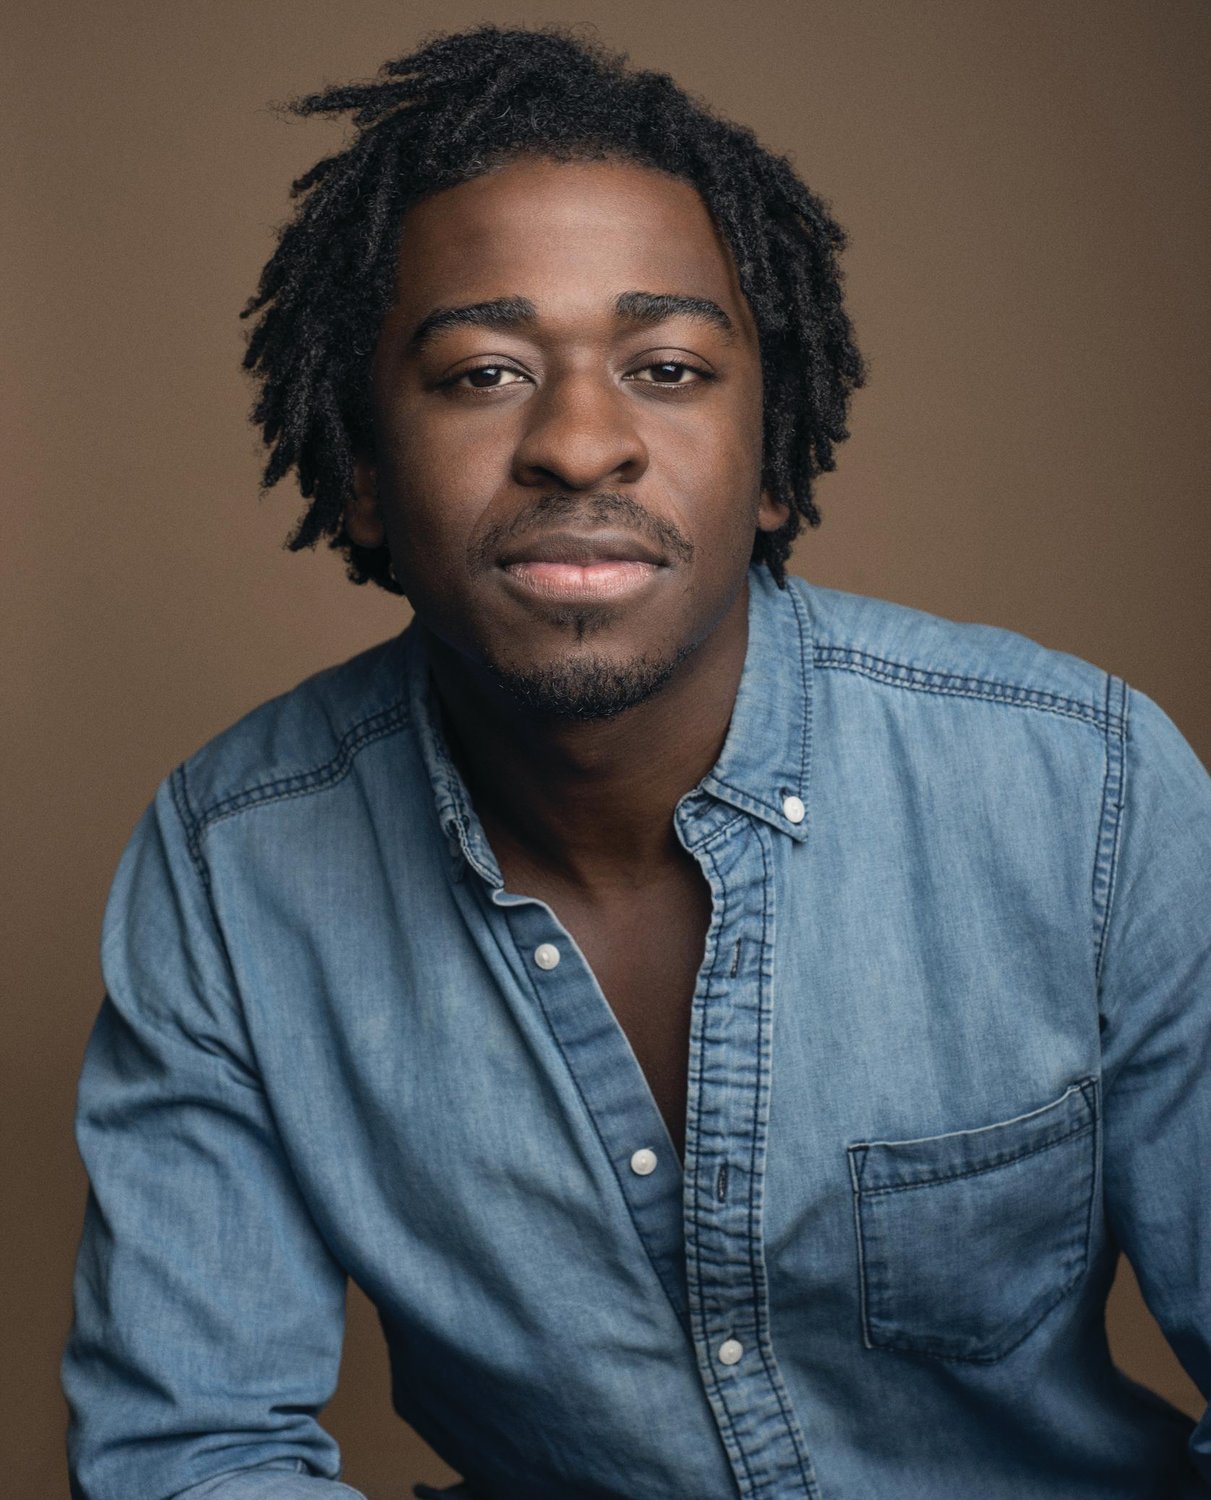 Edson Jean, director of the film, “Ludi,” part of the lineup in this year’s Women & Film festival.